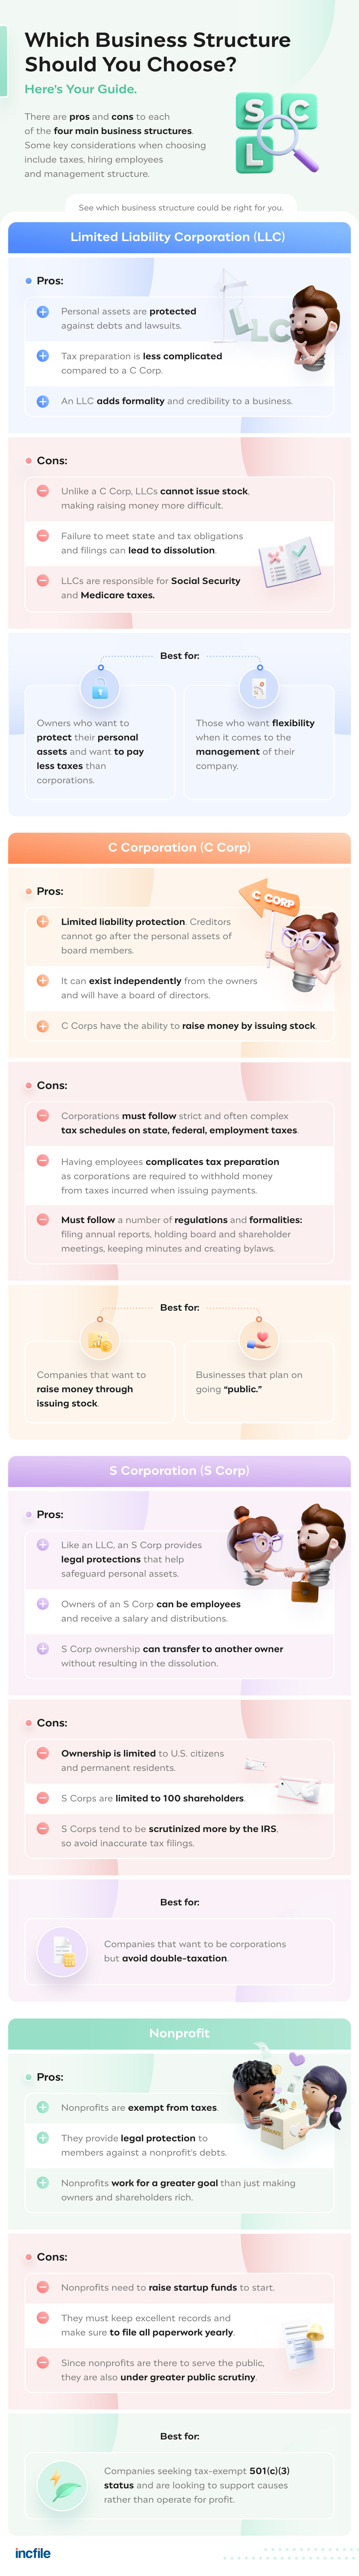 types of business formations